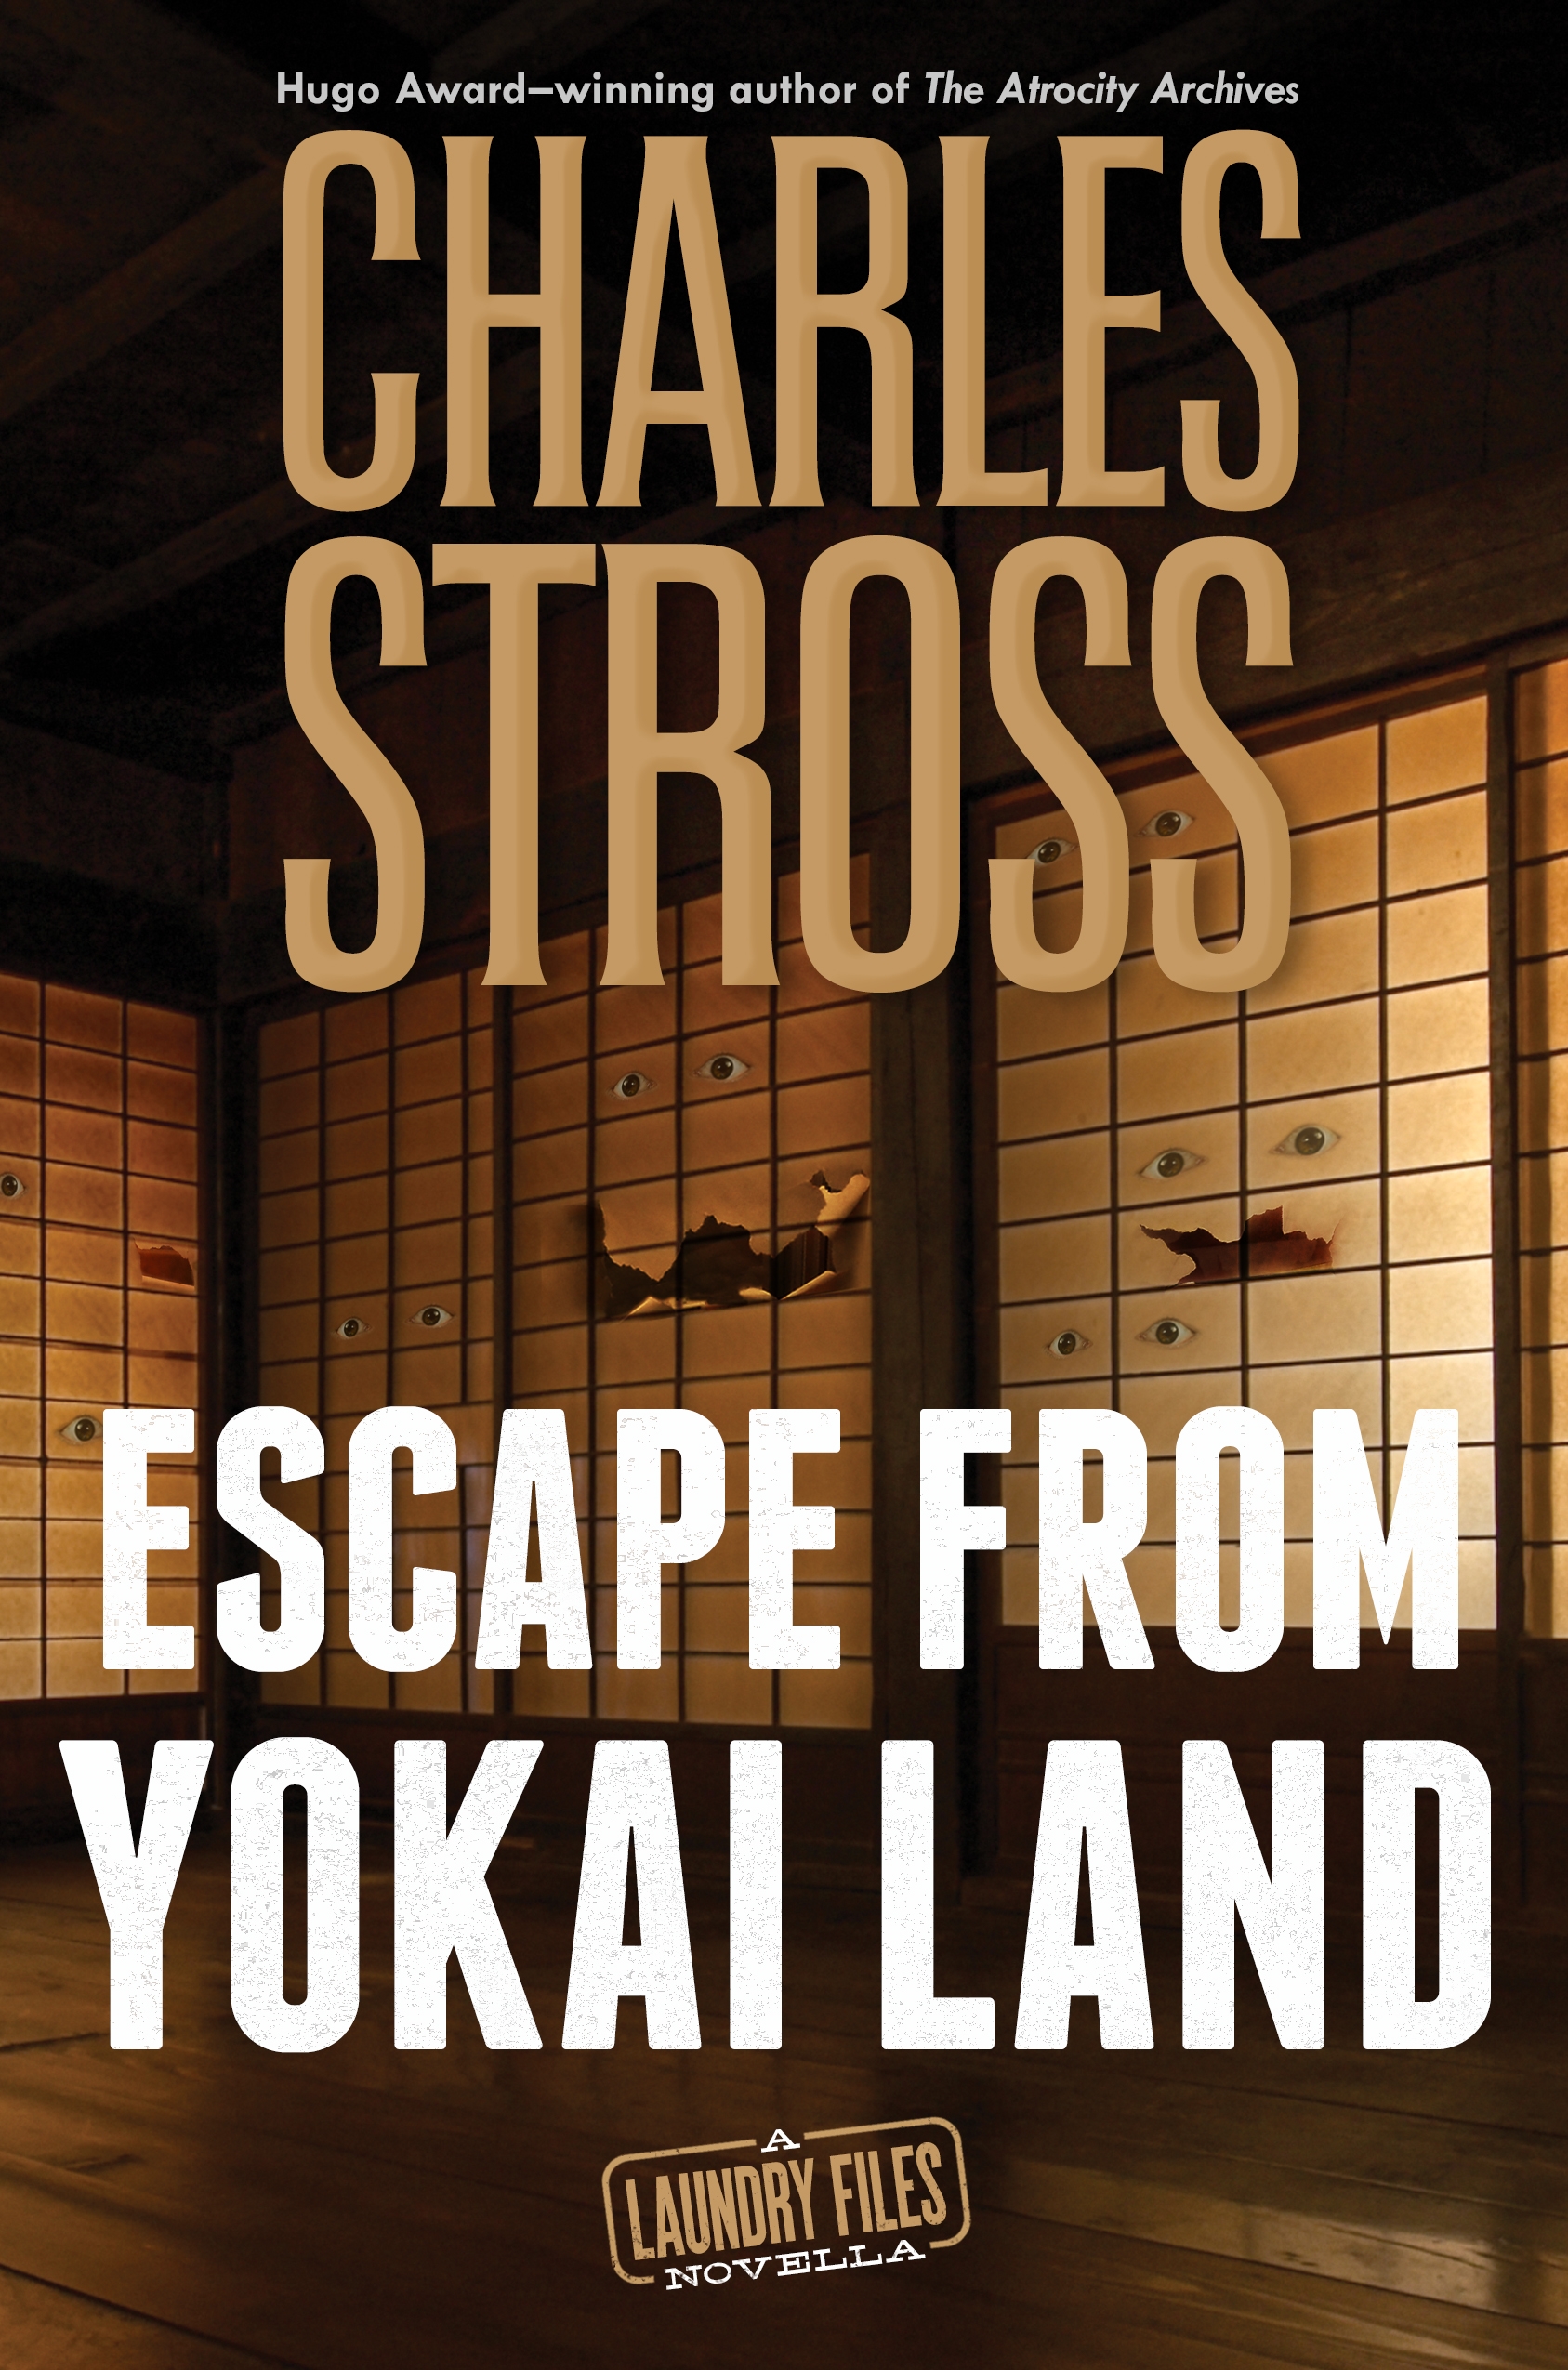 Escape from Yokai Land : A Laundry Files Novella by Charles Stross